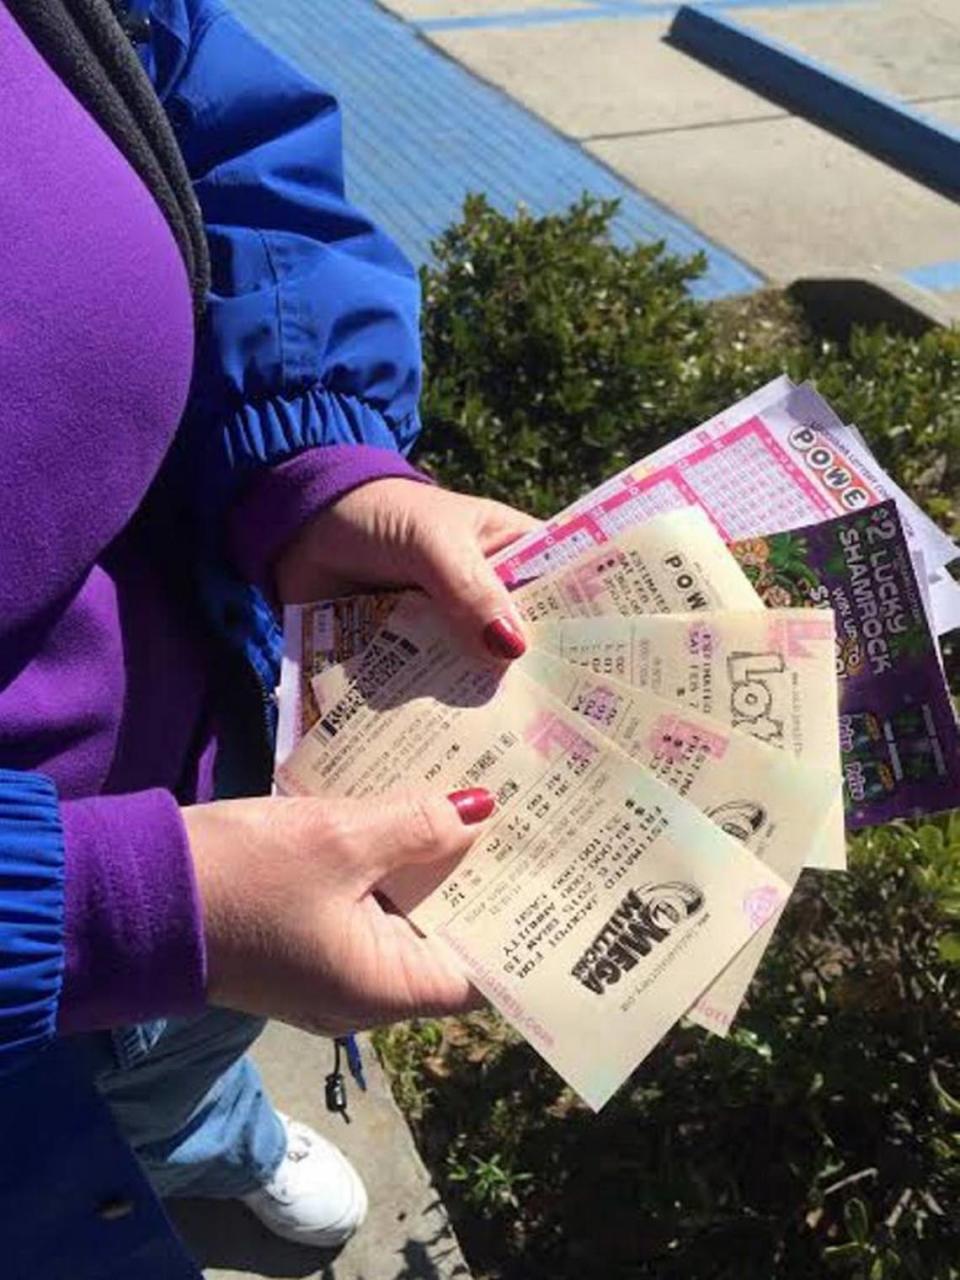 A woman bought tickets from the Purple Cow on Brownswitch Road in Slidell hoping to get her piece of the $380 million jackpot in 2015. The Powerball tickets were sold in Mississippi in January 2020, and it’s become the lottery game of choice for South Mississippi.